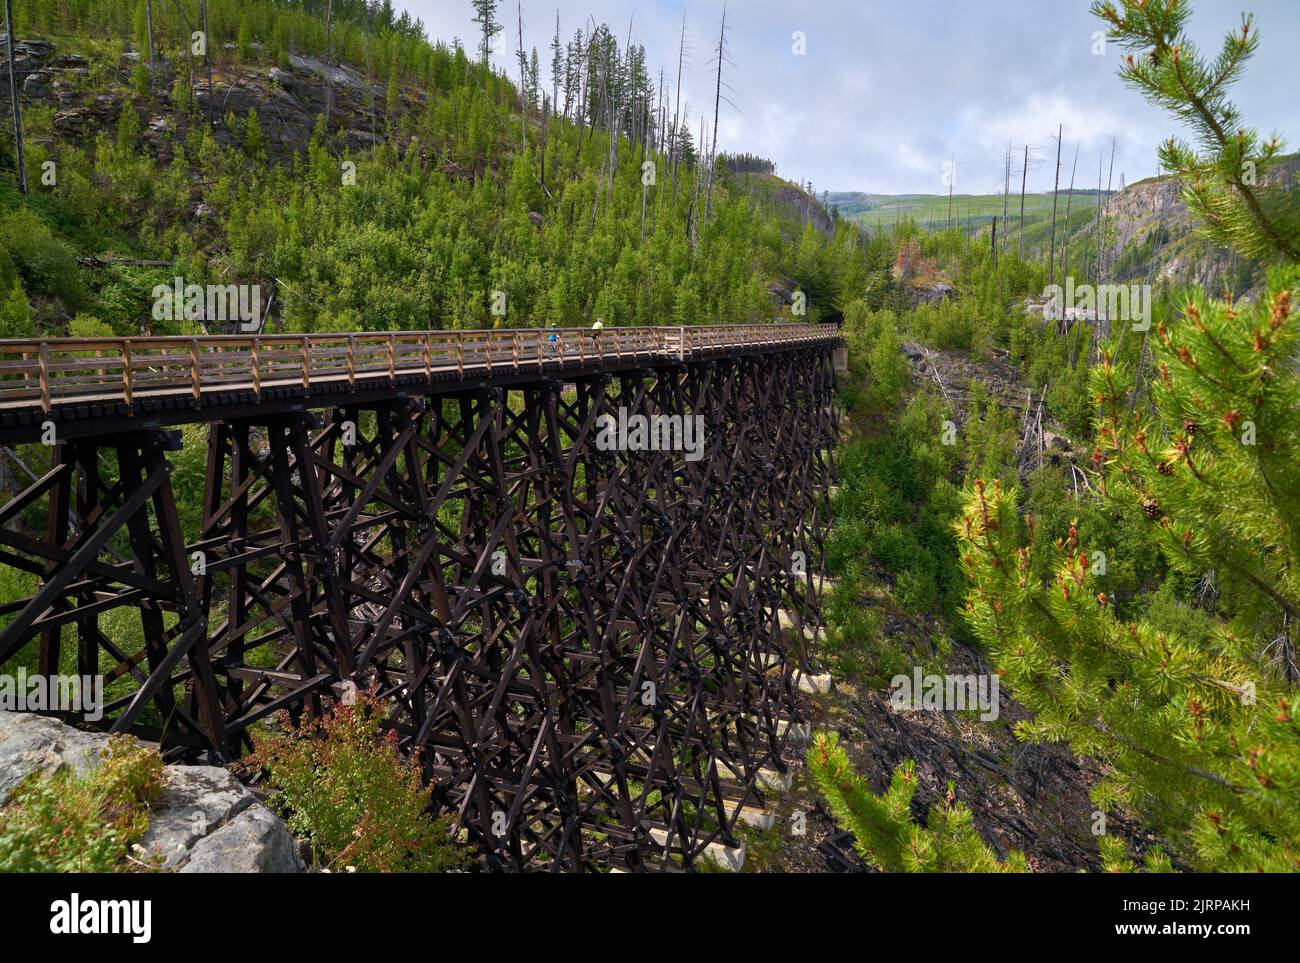 Cyclists on Myra Canyon Trestle 7 Kelowna. Cyclists cross the Historic railroad trestles used for biking and hiking surround Myra Canyon located in My Stock Photo